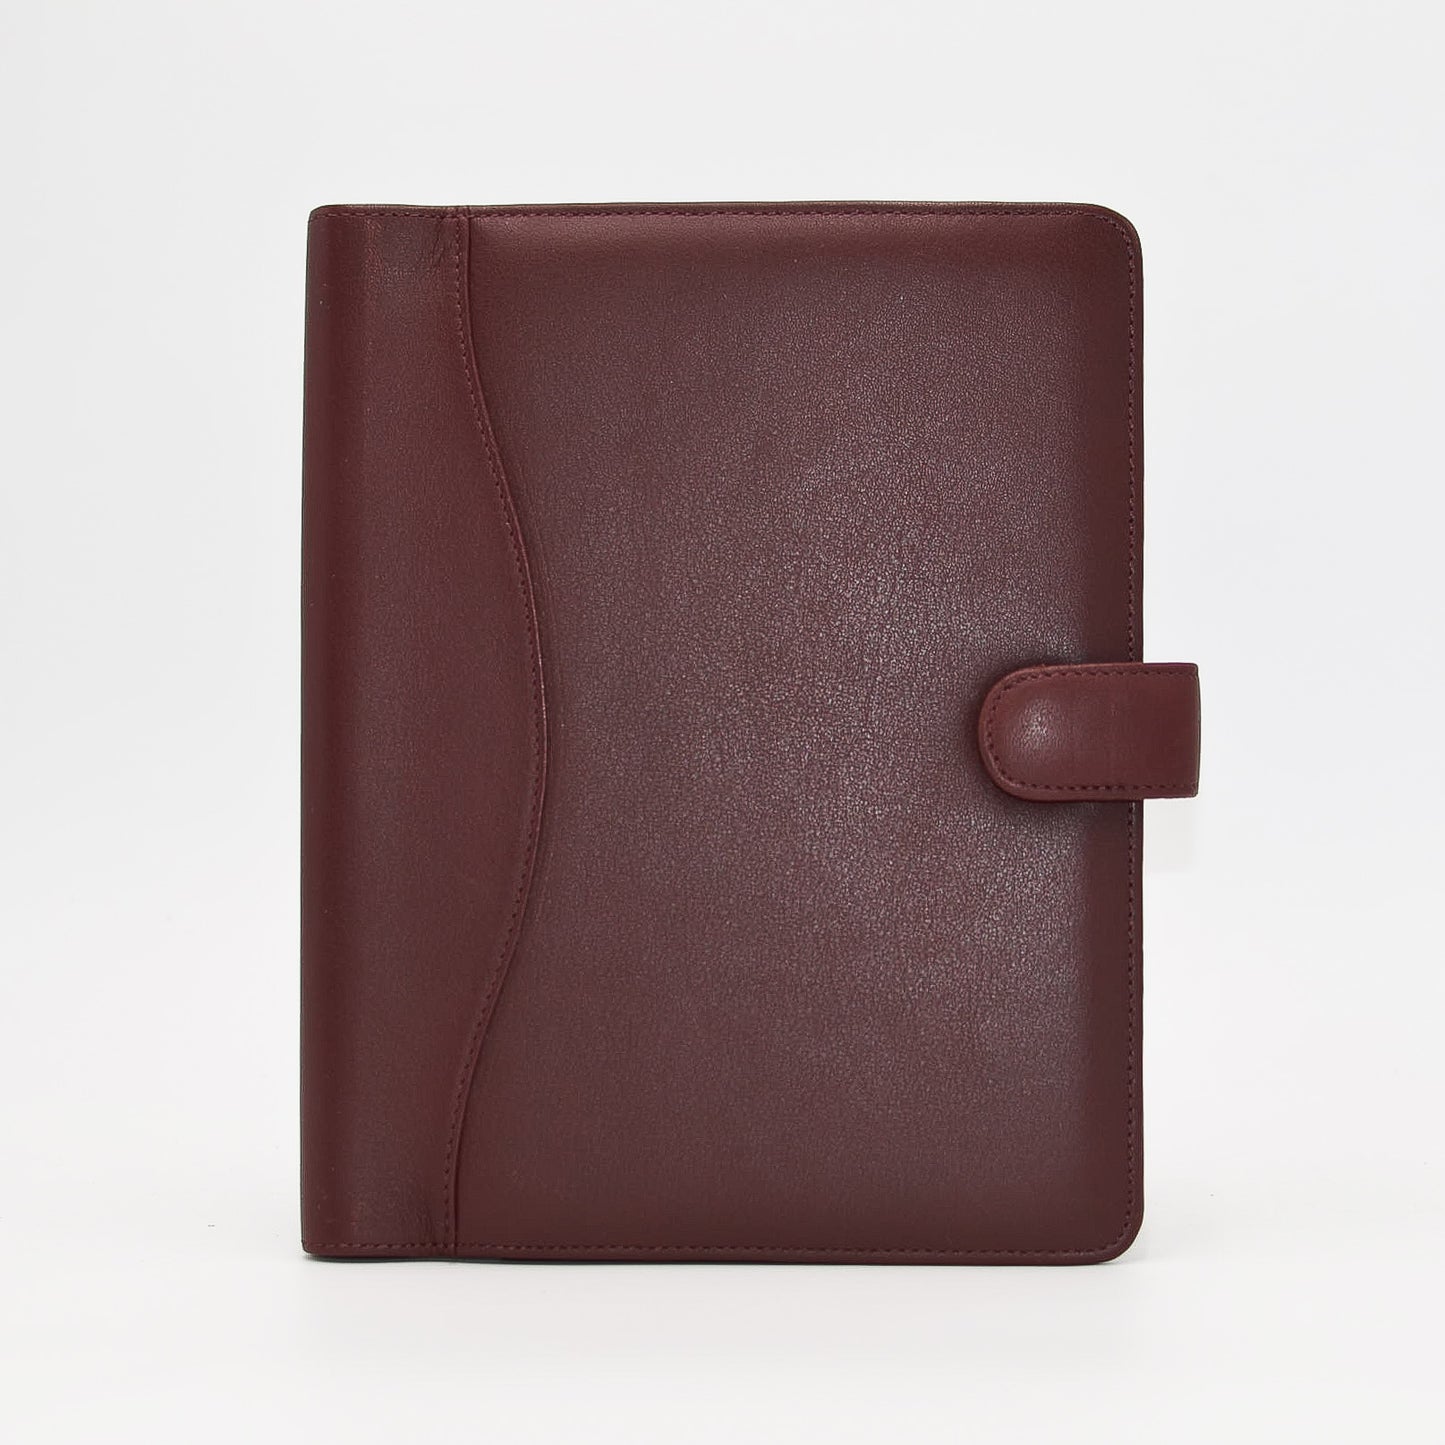 This leather cover is available in British Tan, Red, Burgundy, Green, Black, and Brown. This 7-1/2" x 9-3/4" cover accommodates wire bound and loose leaf inserts with an optional metal 3-ring binder. Keep yourself organized with ease with a snap closure, horizontal note pad holder, clear identification holder, document holder, and leather book mark. 